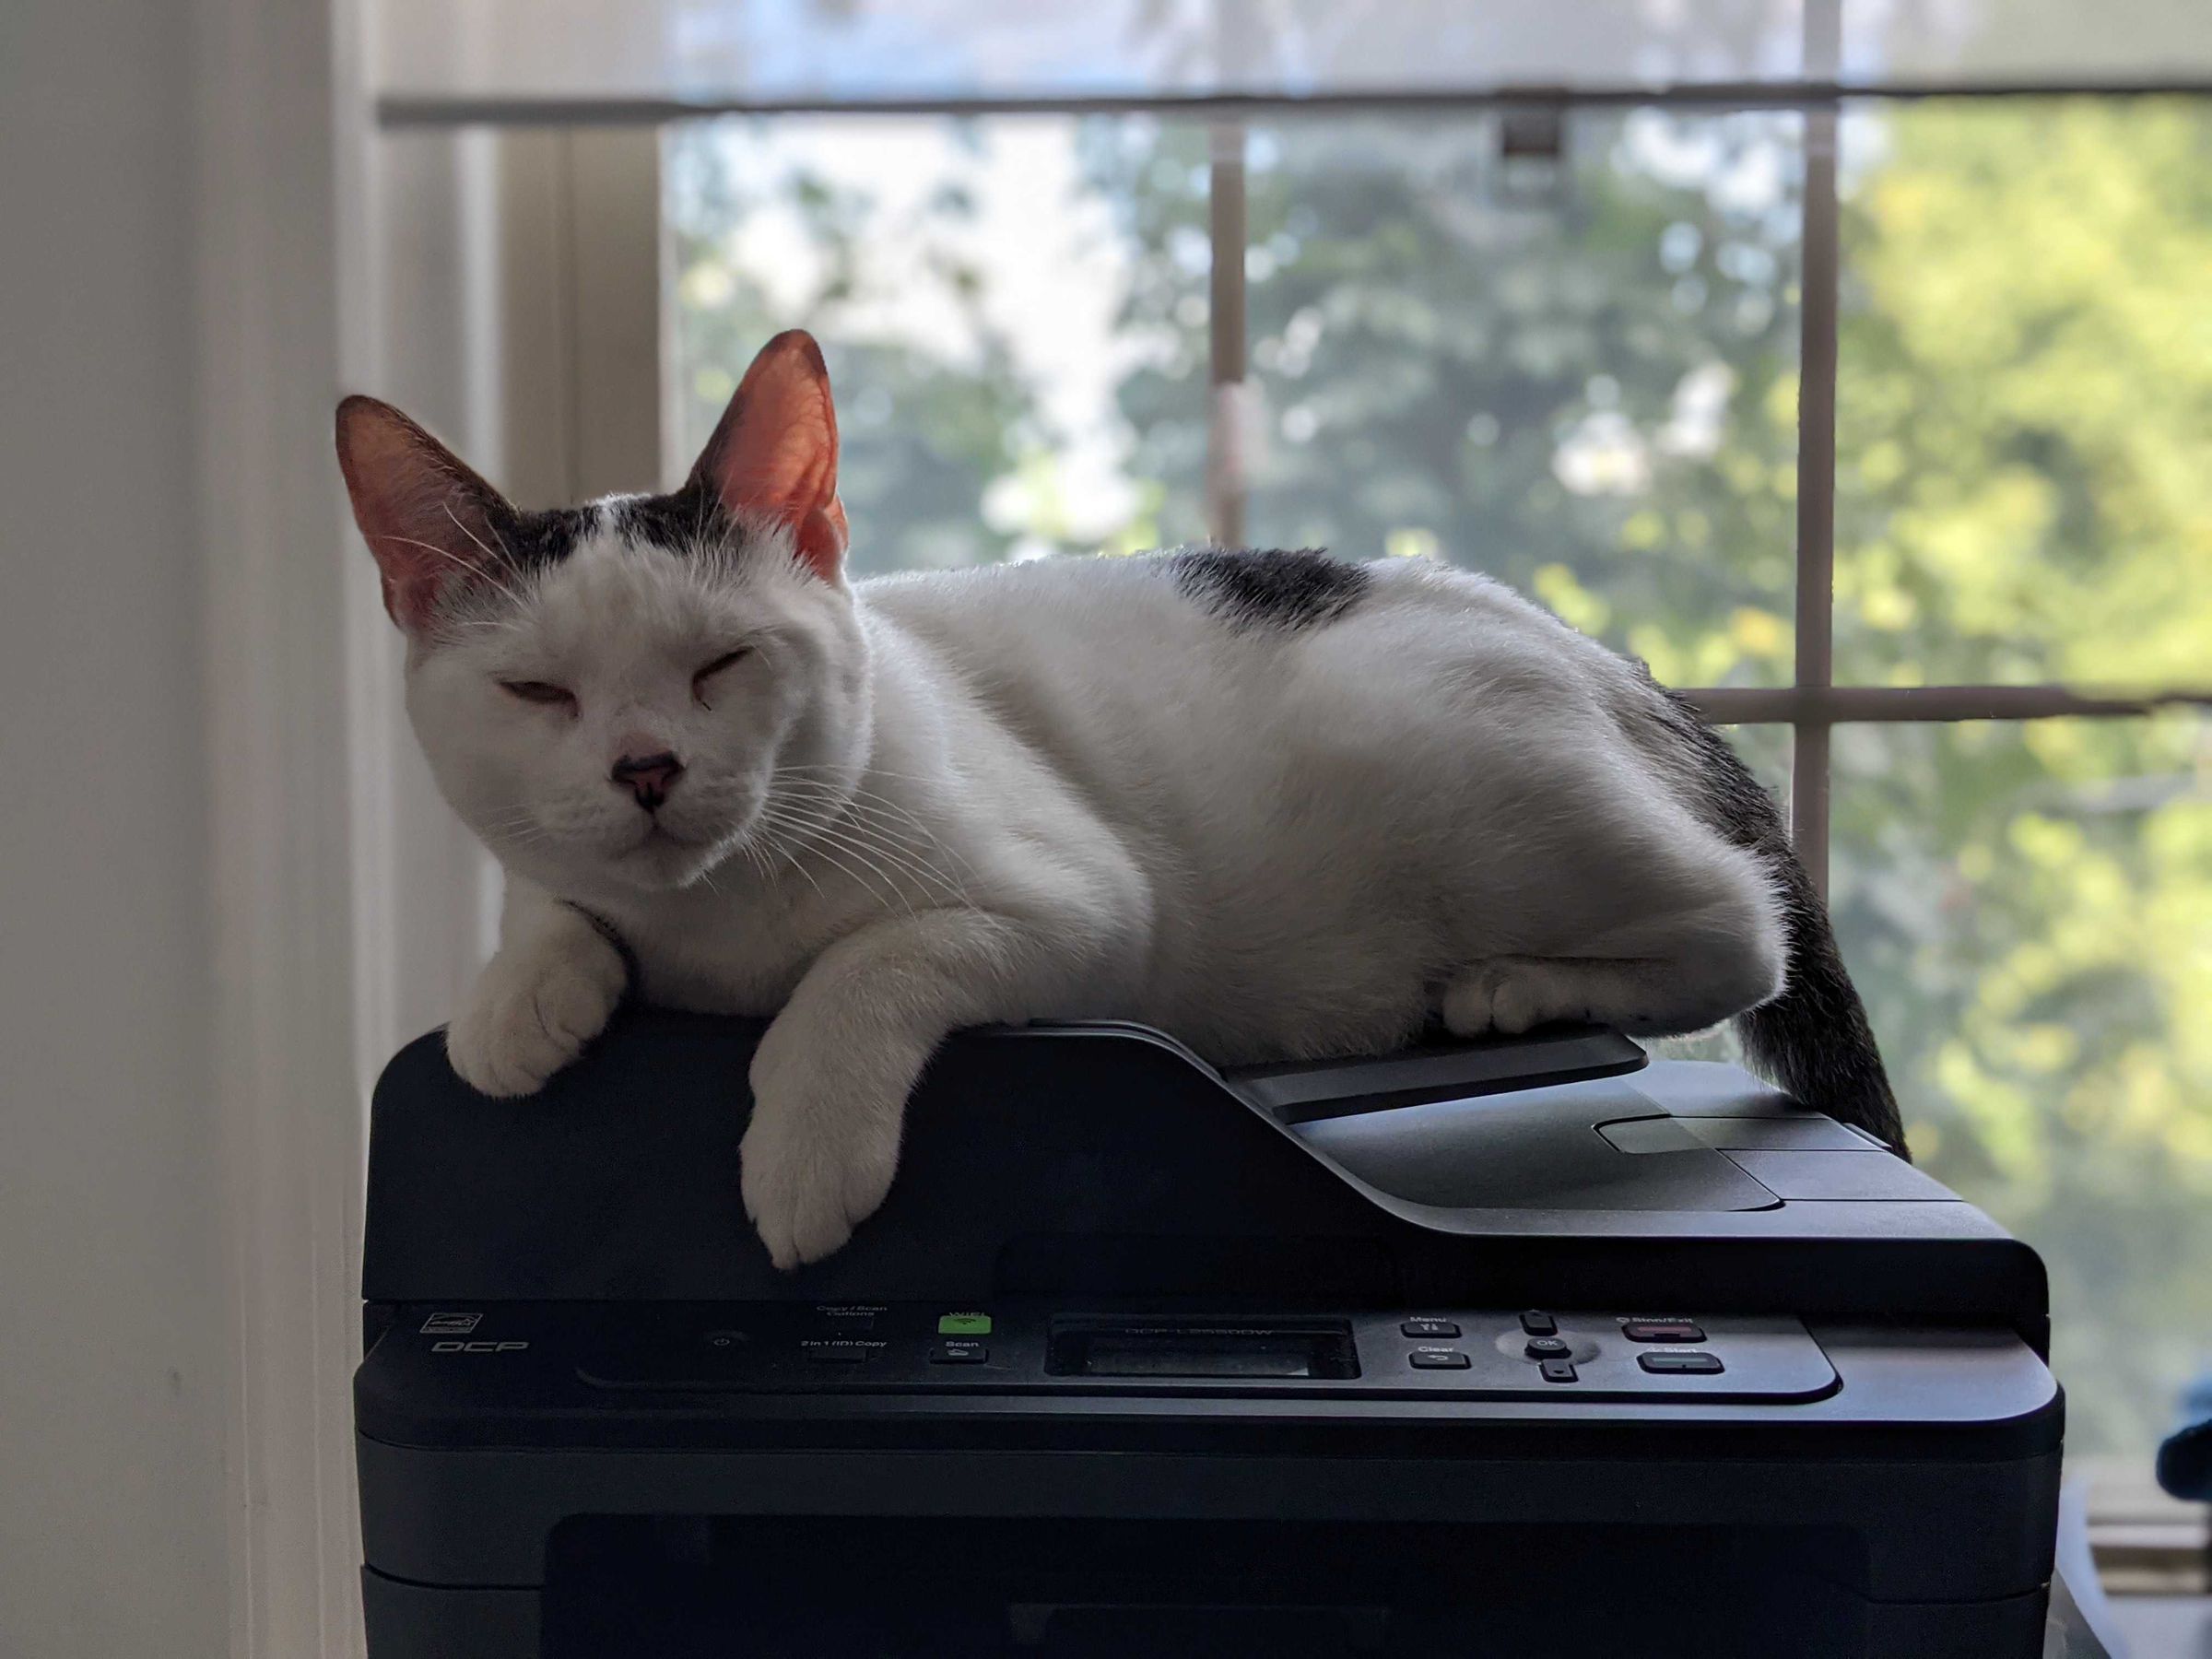 A white cat with black markings sits on top of a black printer.